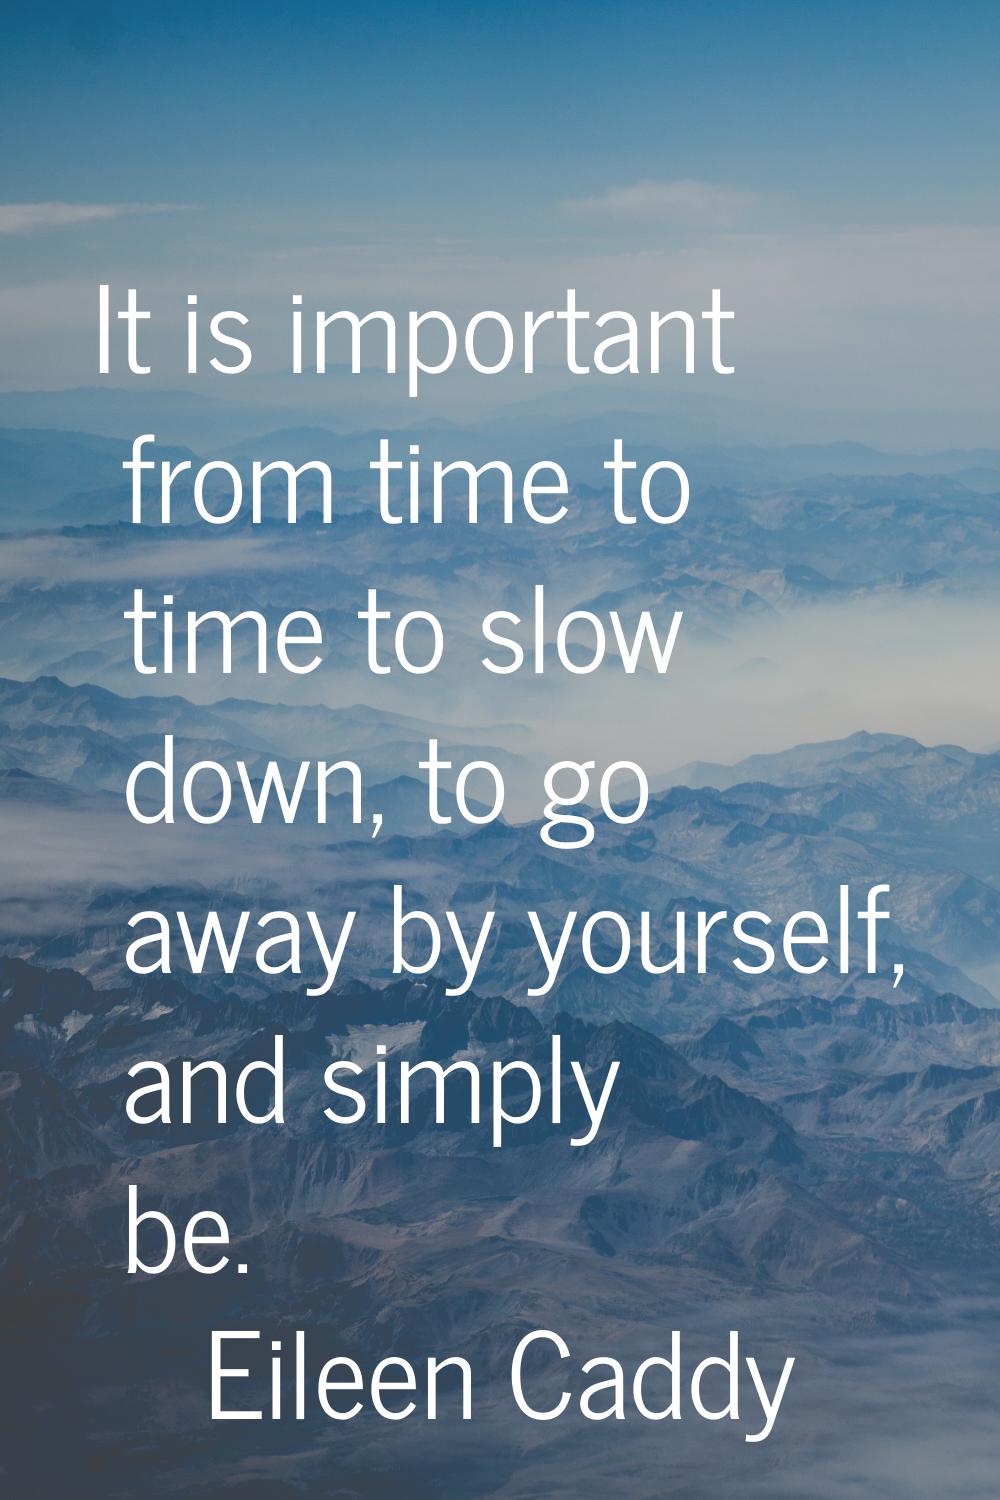 It is important from time to time to slow down, to go away by yourself, and simply be.